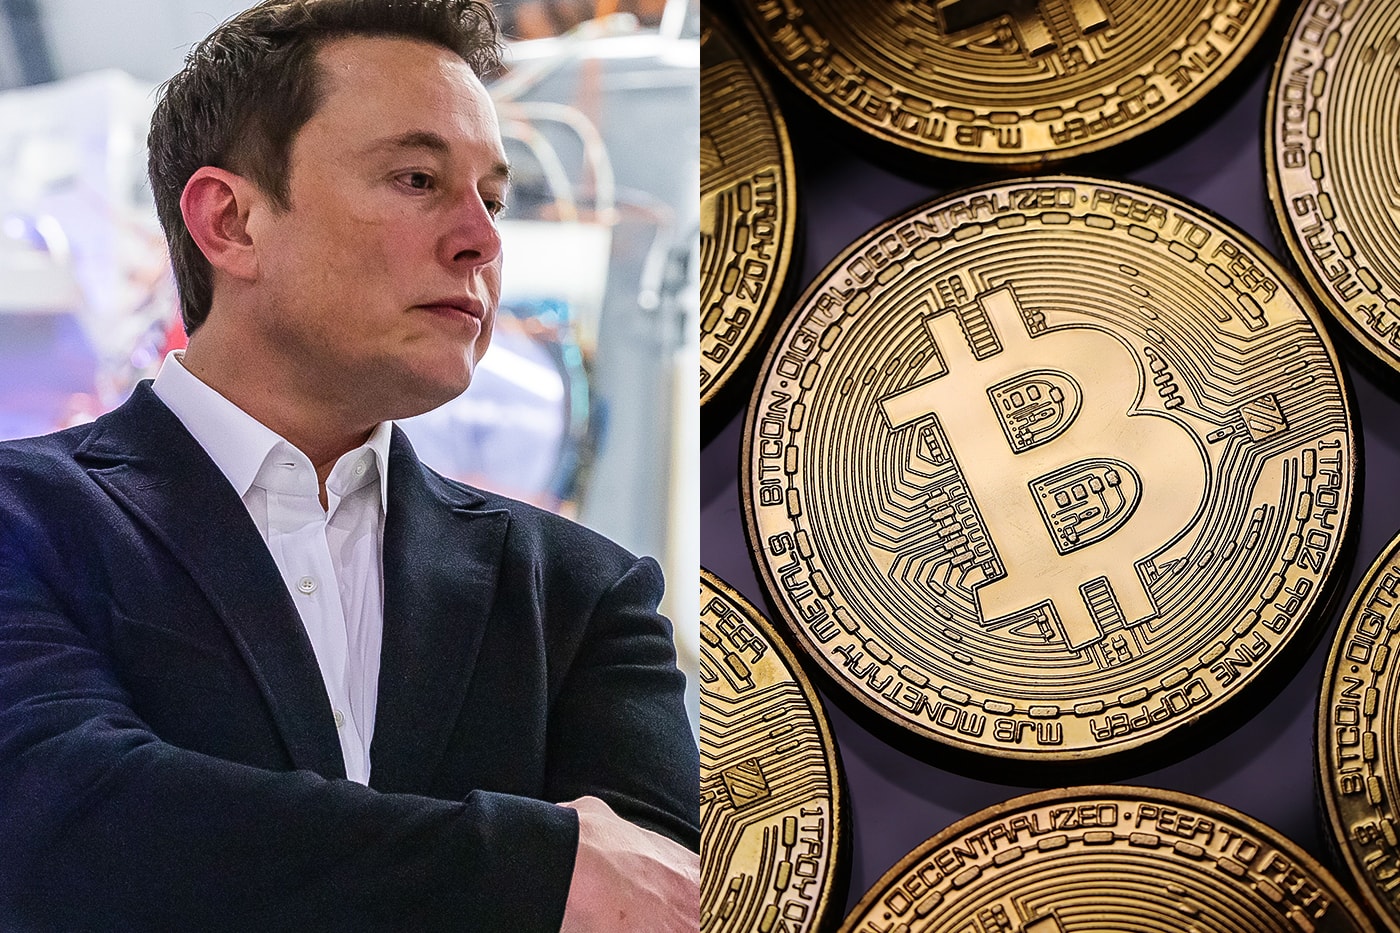 Bitcoin Price Value Drops Elon Musk Twitter Response Cryptocurrency SapceX Dogecoin Tesla 